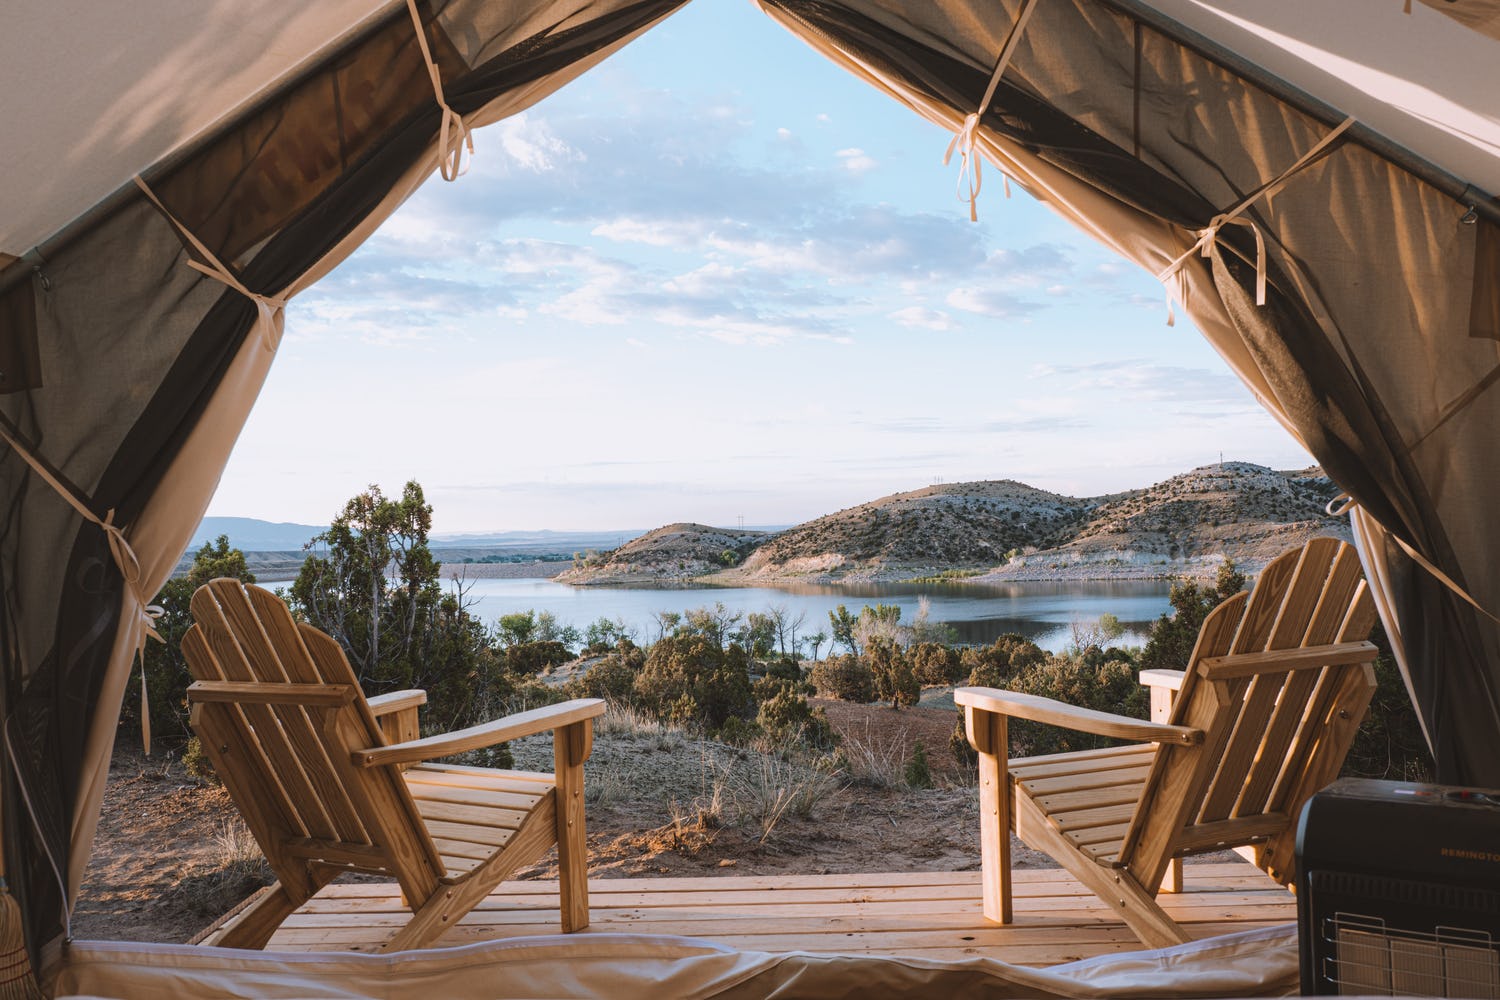 The Best Lakeside Glamping Spots to Visit This Summer